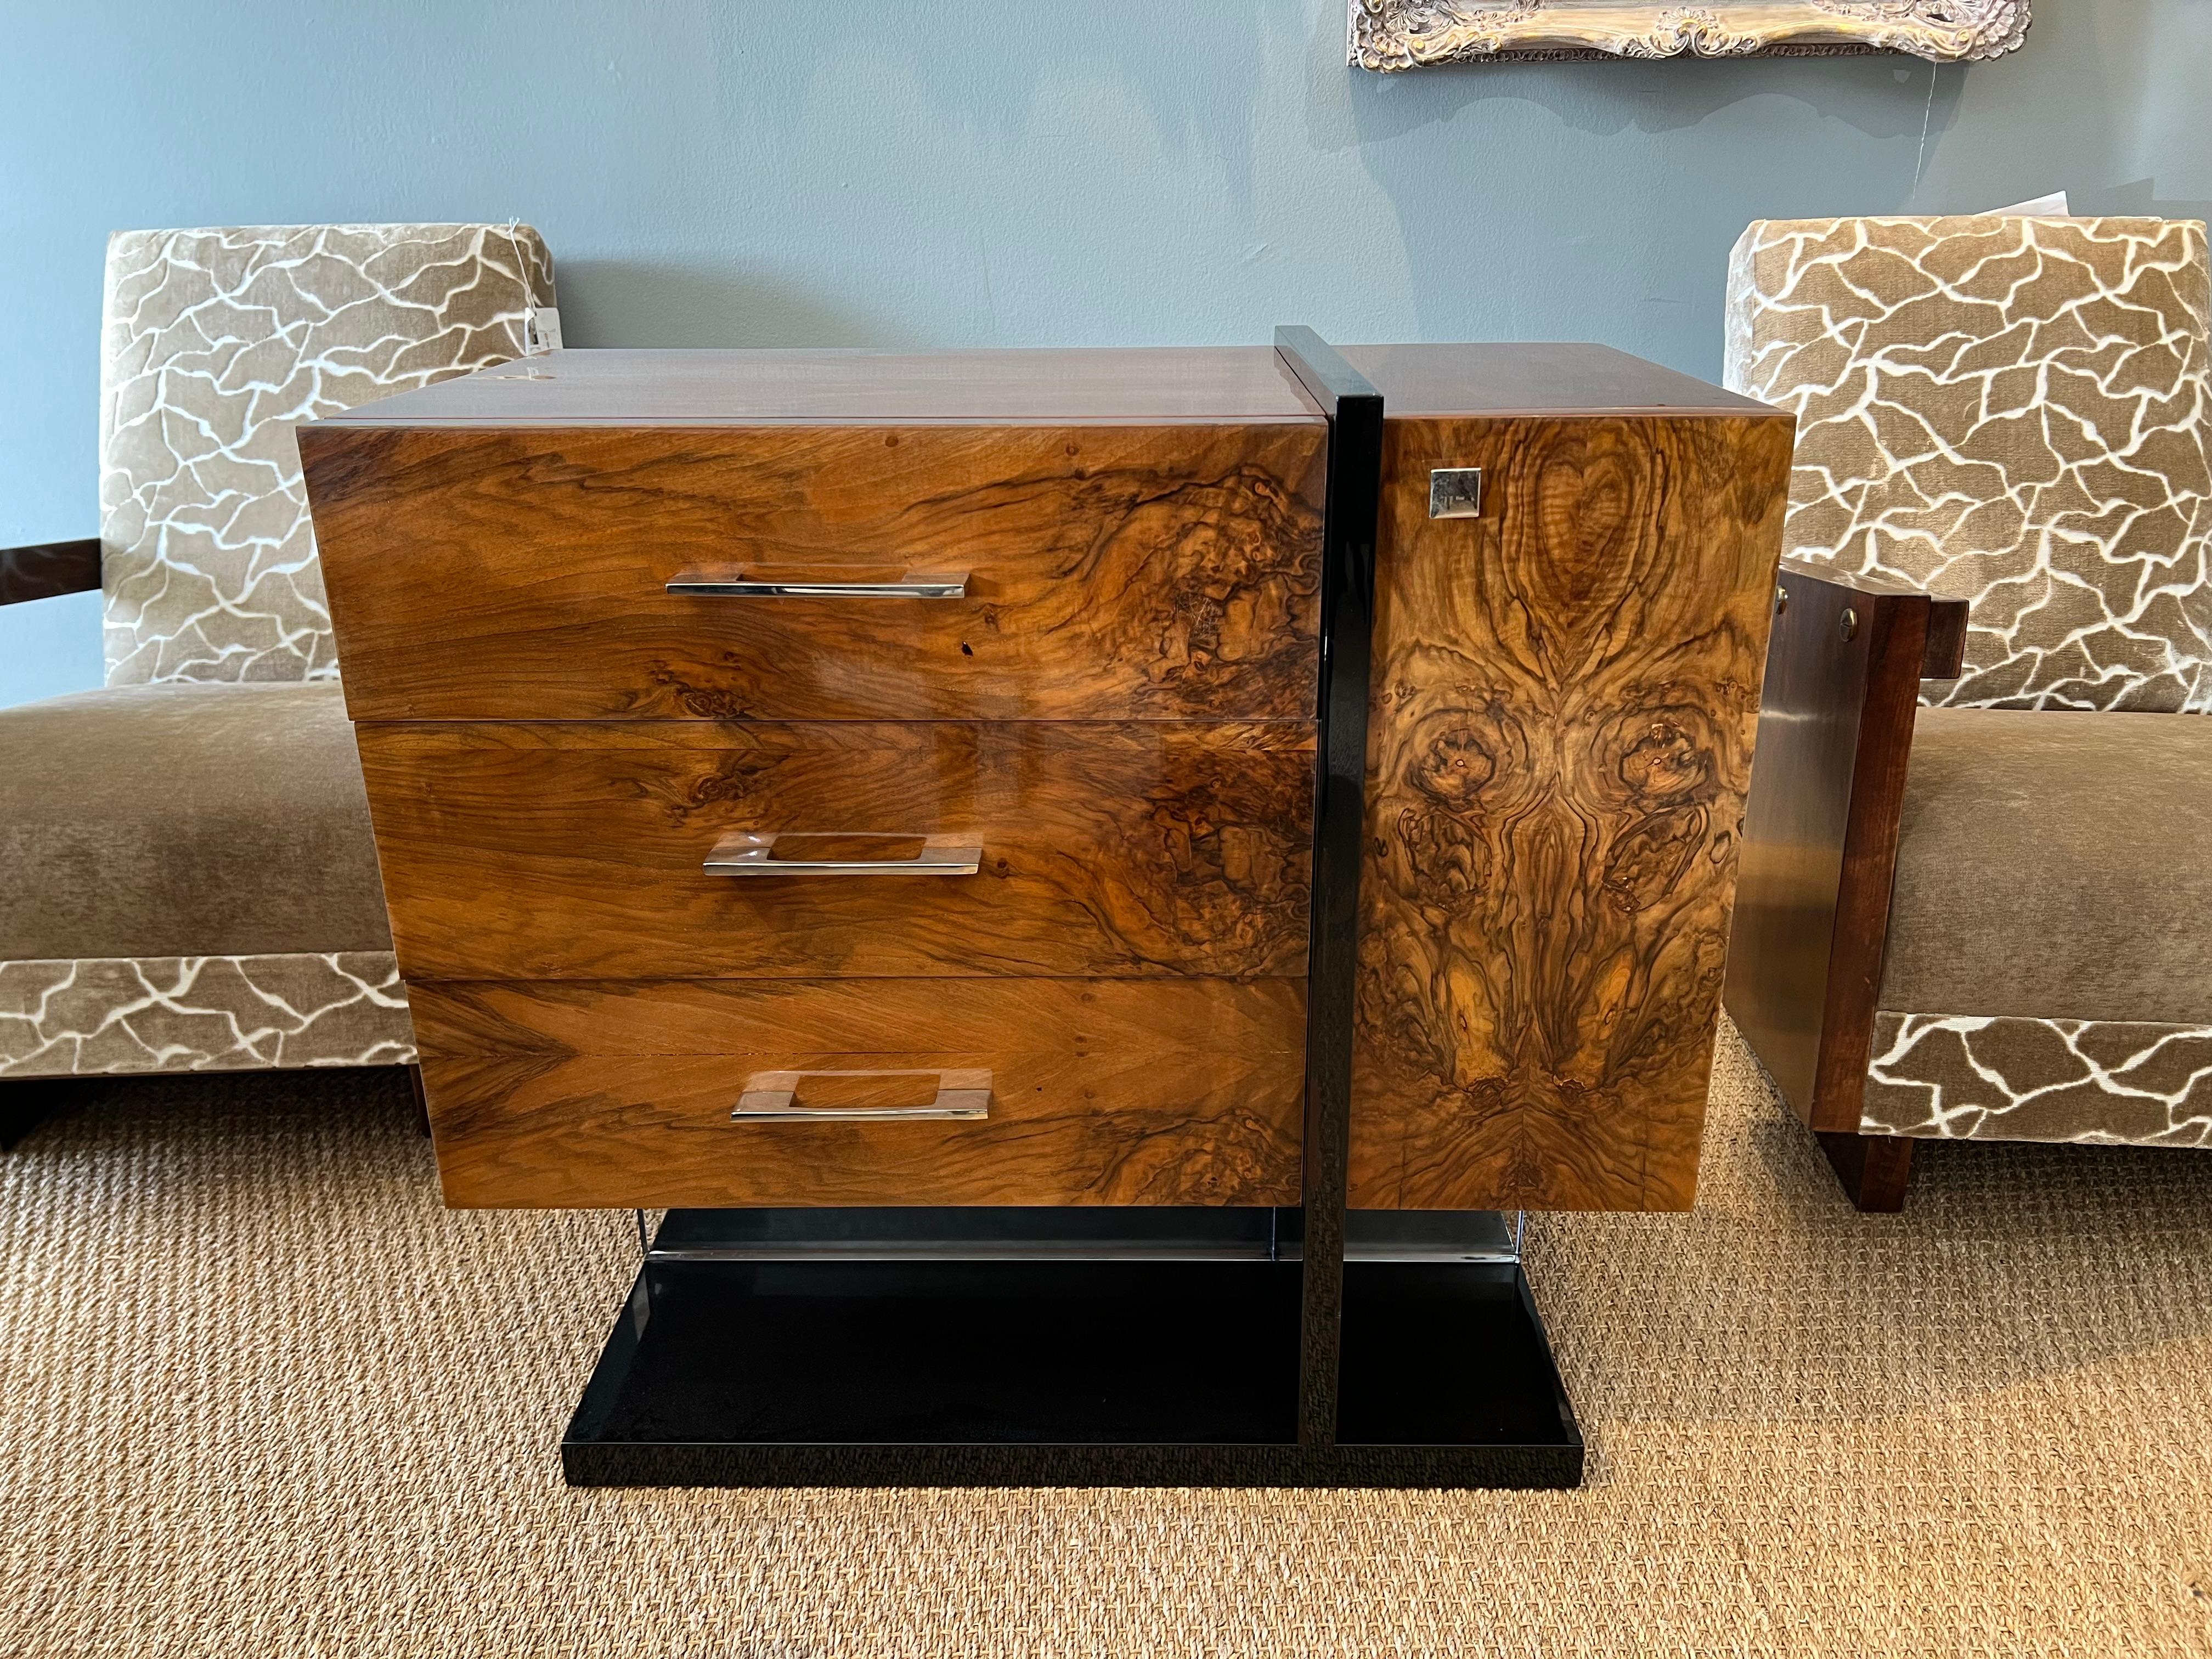 Side table is made out of high quality burl walnut wool. It has ebonized rectangular flat base. Table has 3 horizontal drawers and one vertical drawer with “sphere shape” handles.

Condition is excellent. 

France, circa 1930s

 Measure: 34.5” W x